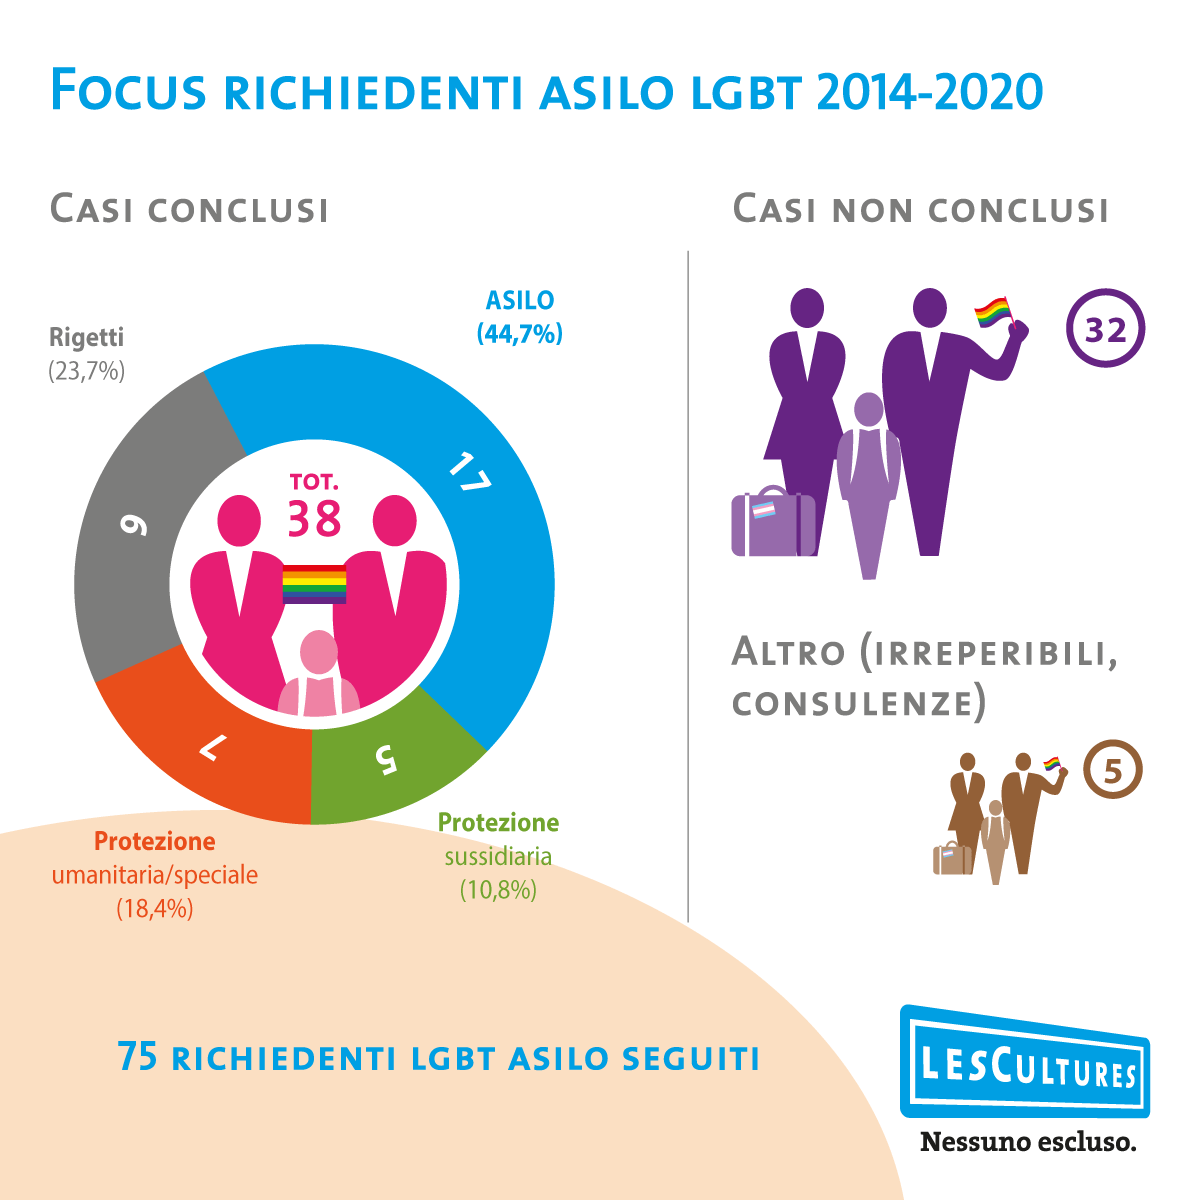 Infographic that shows a focus on LGBT asylum seekers between 2014 and 2020 for Les Cultures Odv